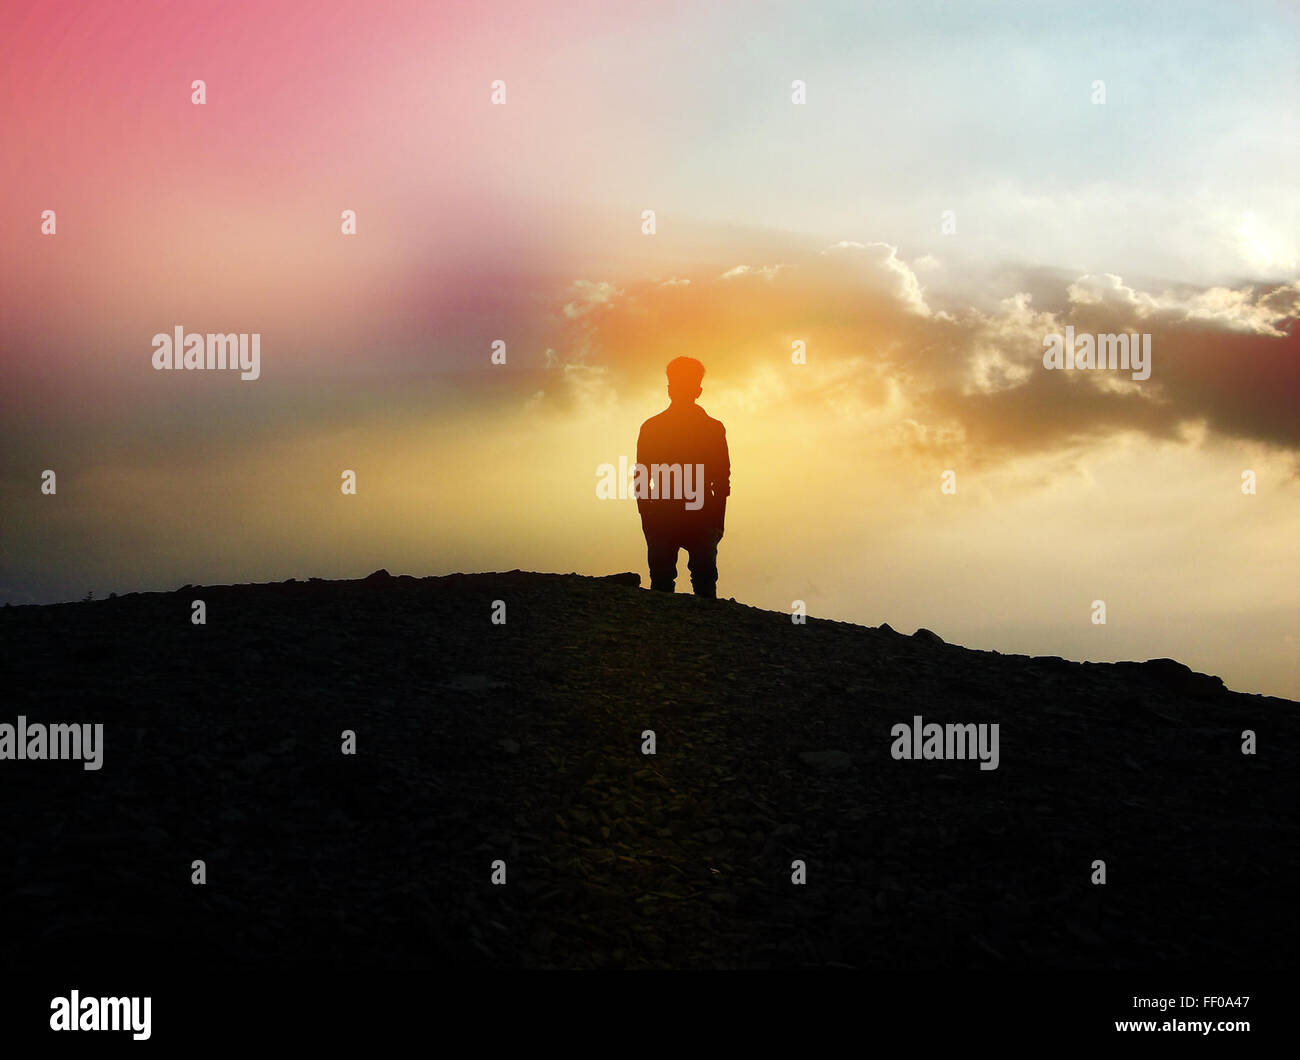 Silhouette of Person Viewing Colorful Sky Silhouette of Person Viewing Colorful Sky Stock Photo